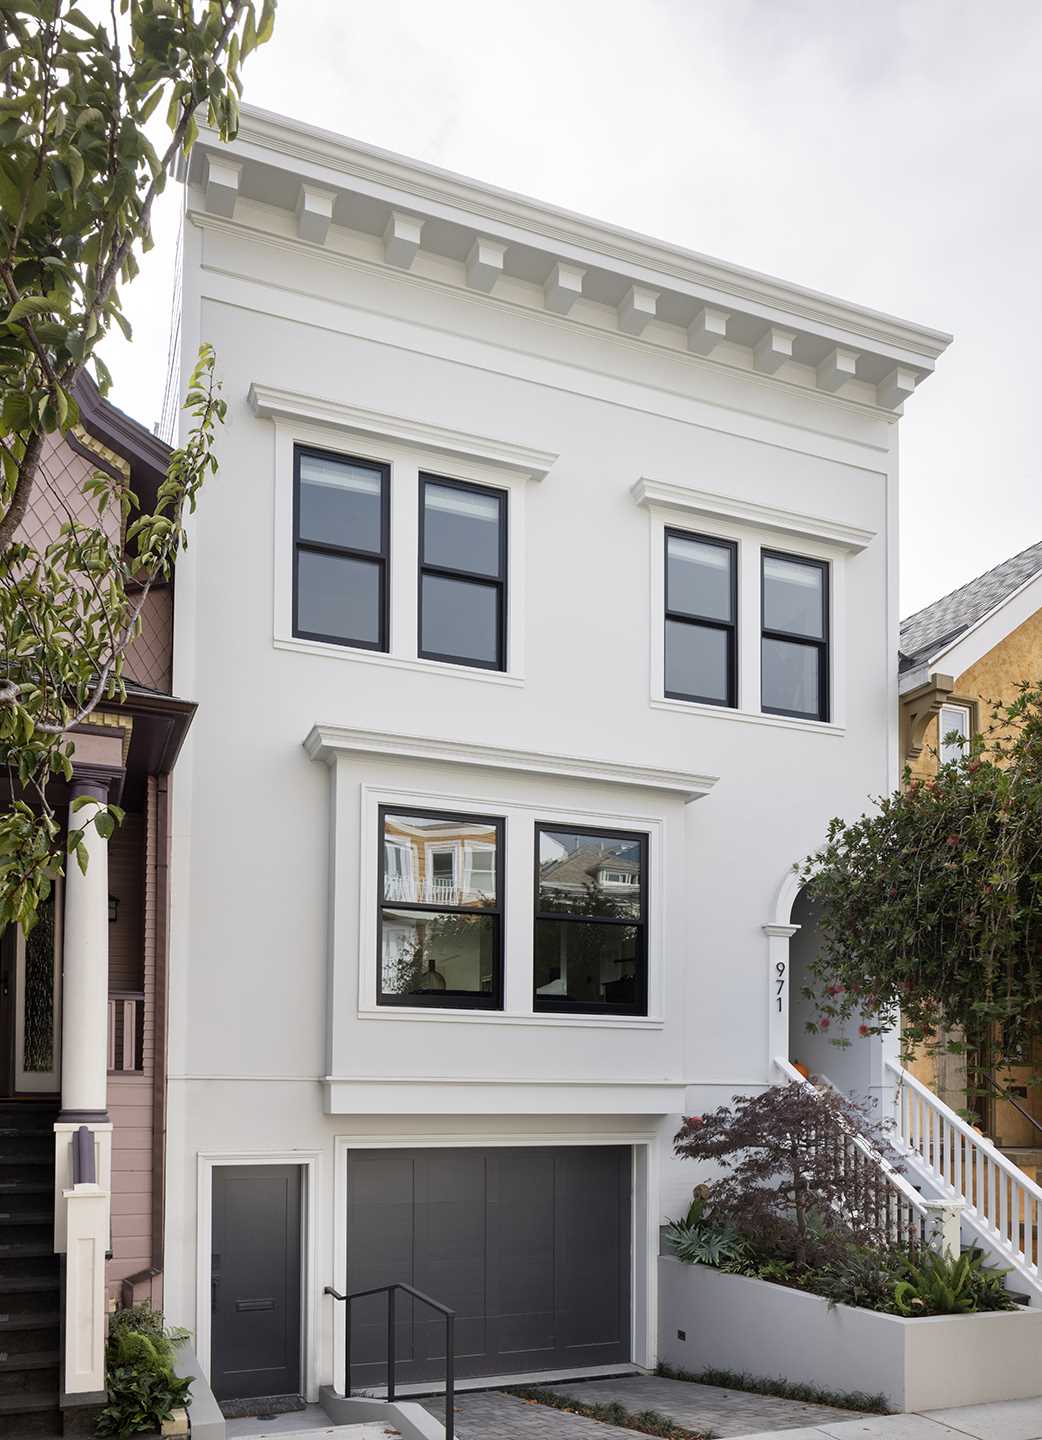 Andrew Mann Architecture has shared photos of a century-old Edwardian house they renovated in a bustling San Francisco neighborhood.